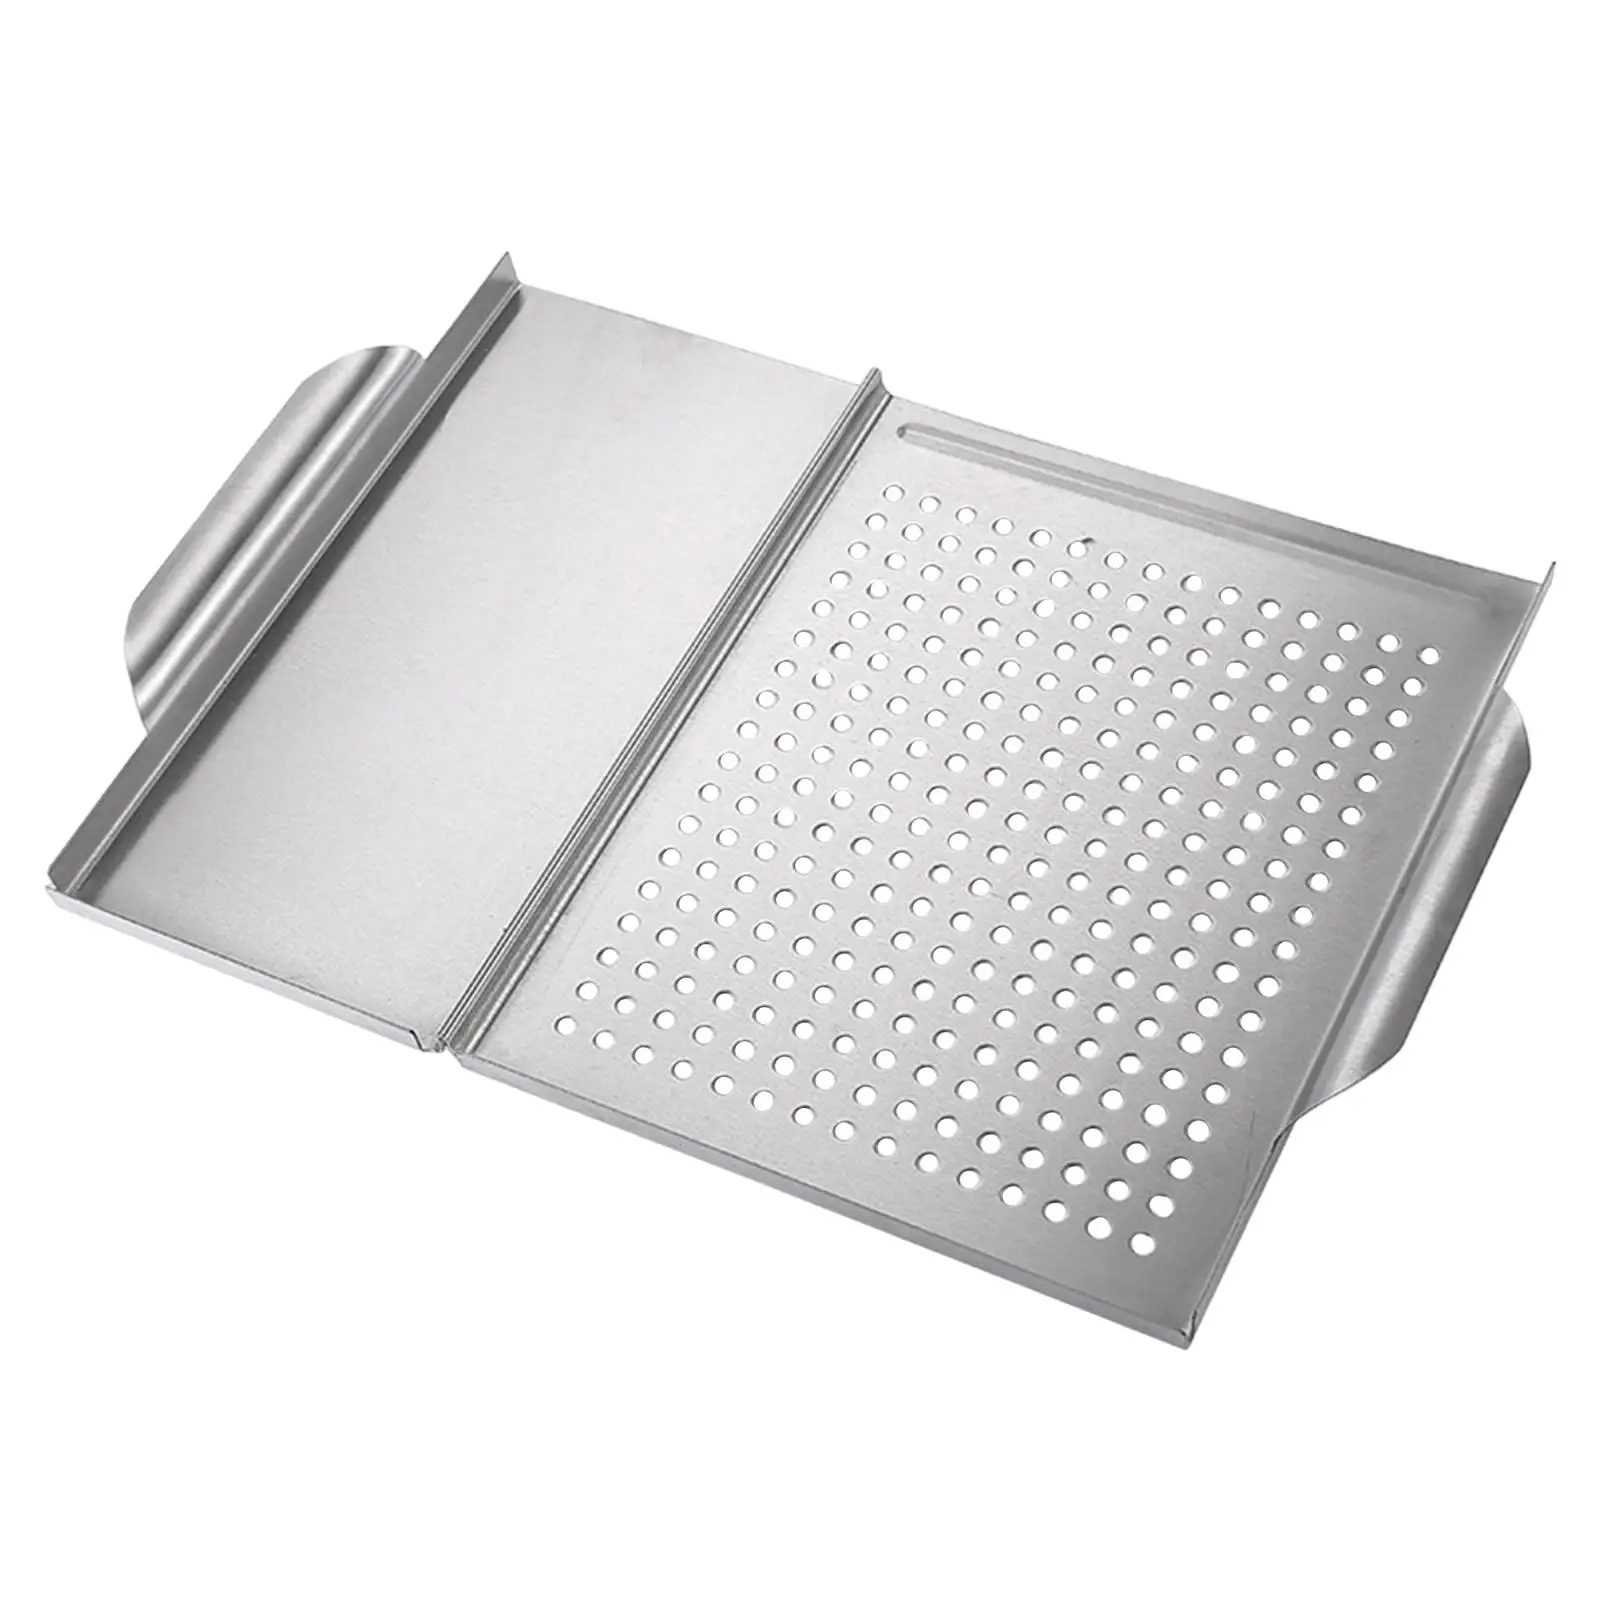 Grilling Tray Nonstick Grill Basket with Holes for Chef Baking Outdoor